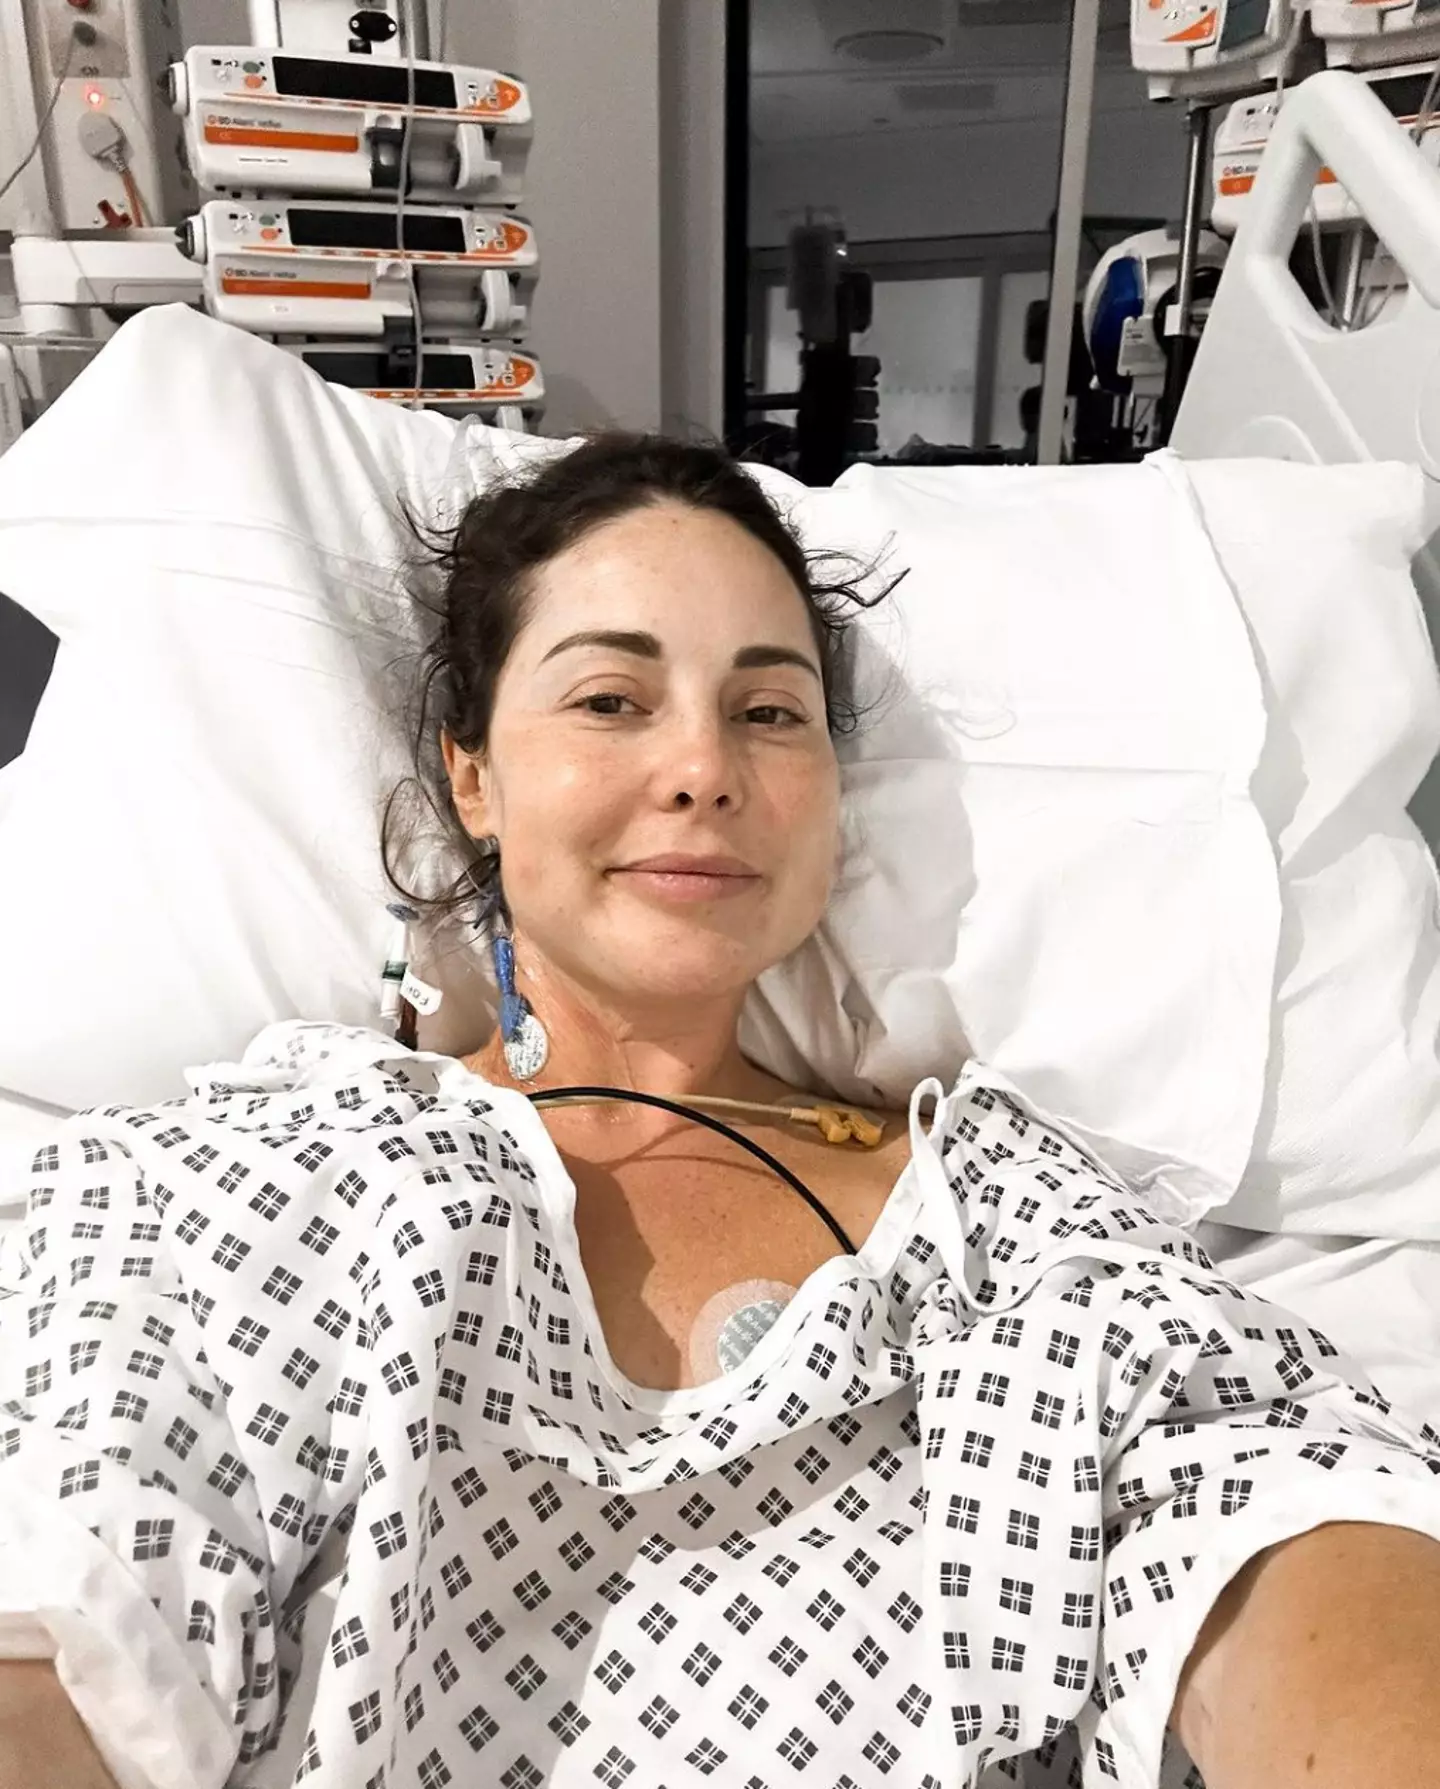 Louise previously opened up about her time in hospital.